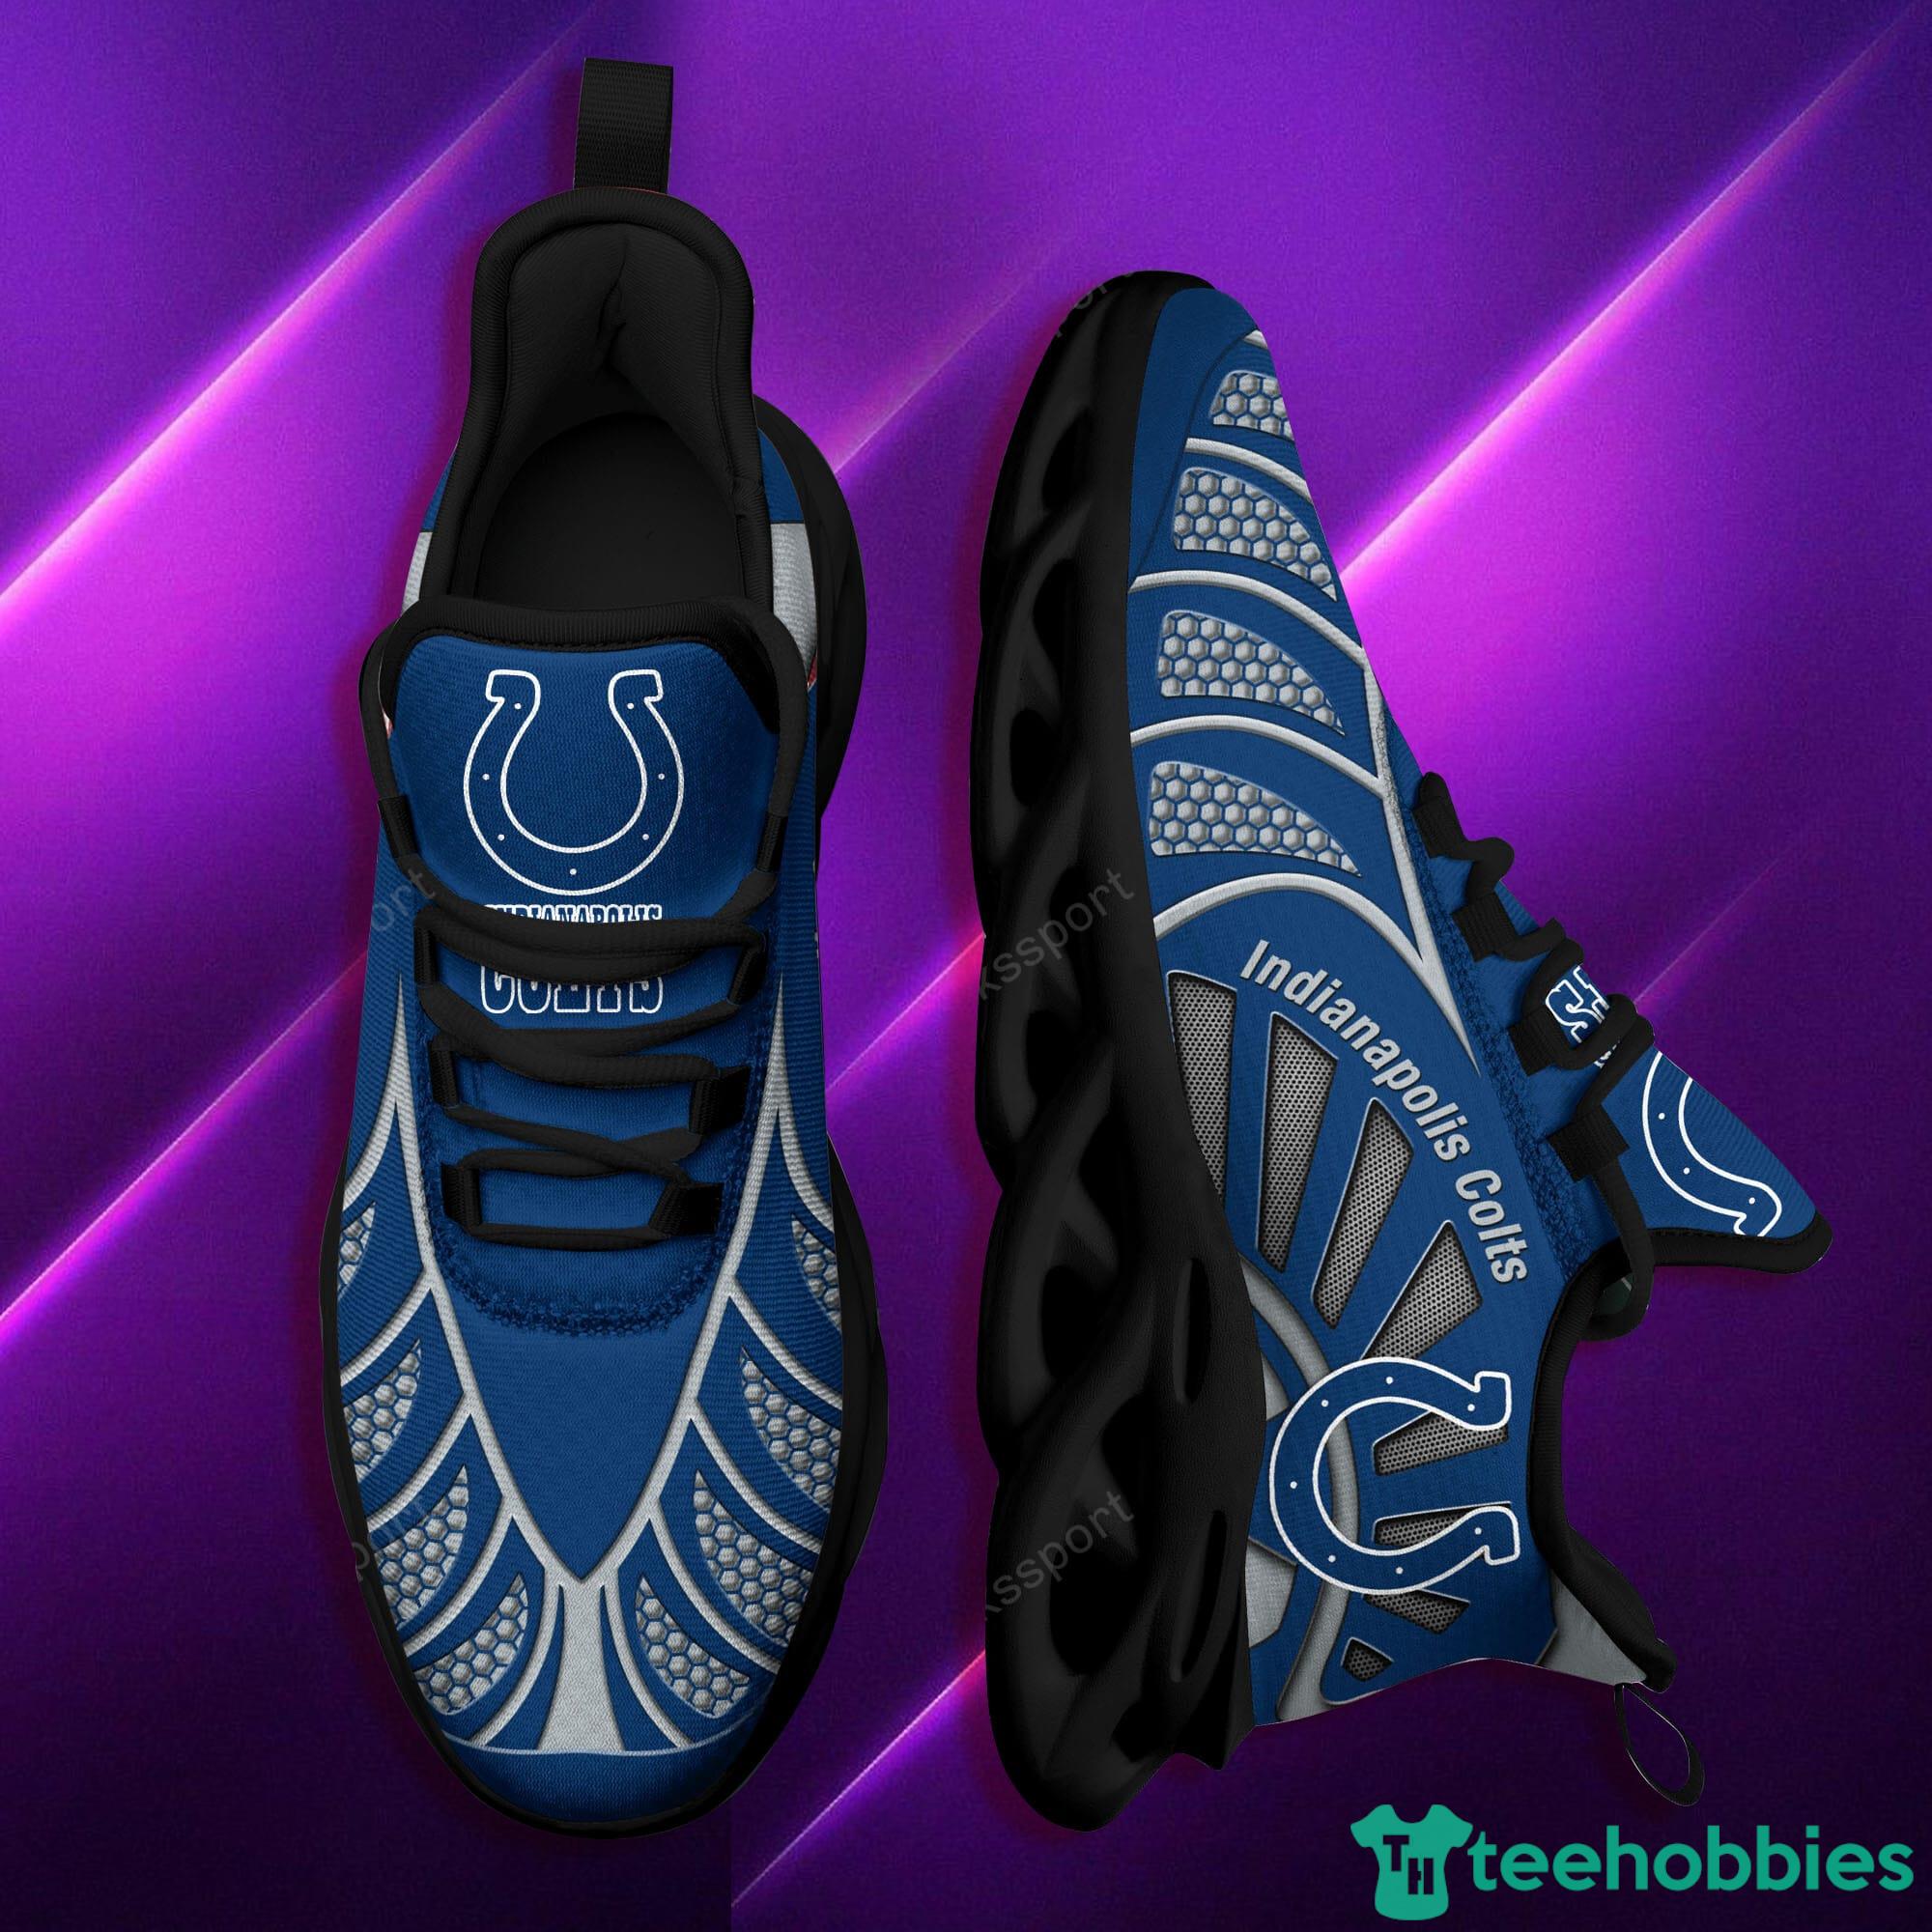 Indianapolis Colts NFL Max Sou Sneakers Running Shoes Product Photo 1